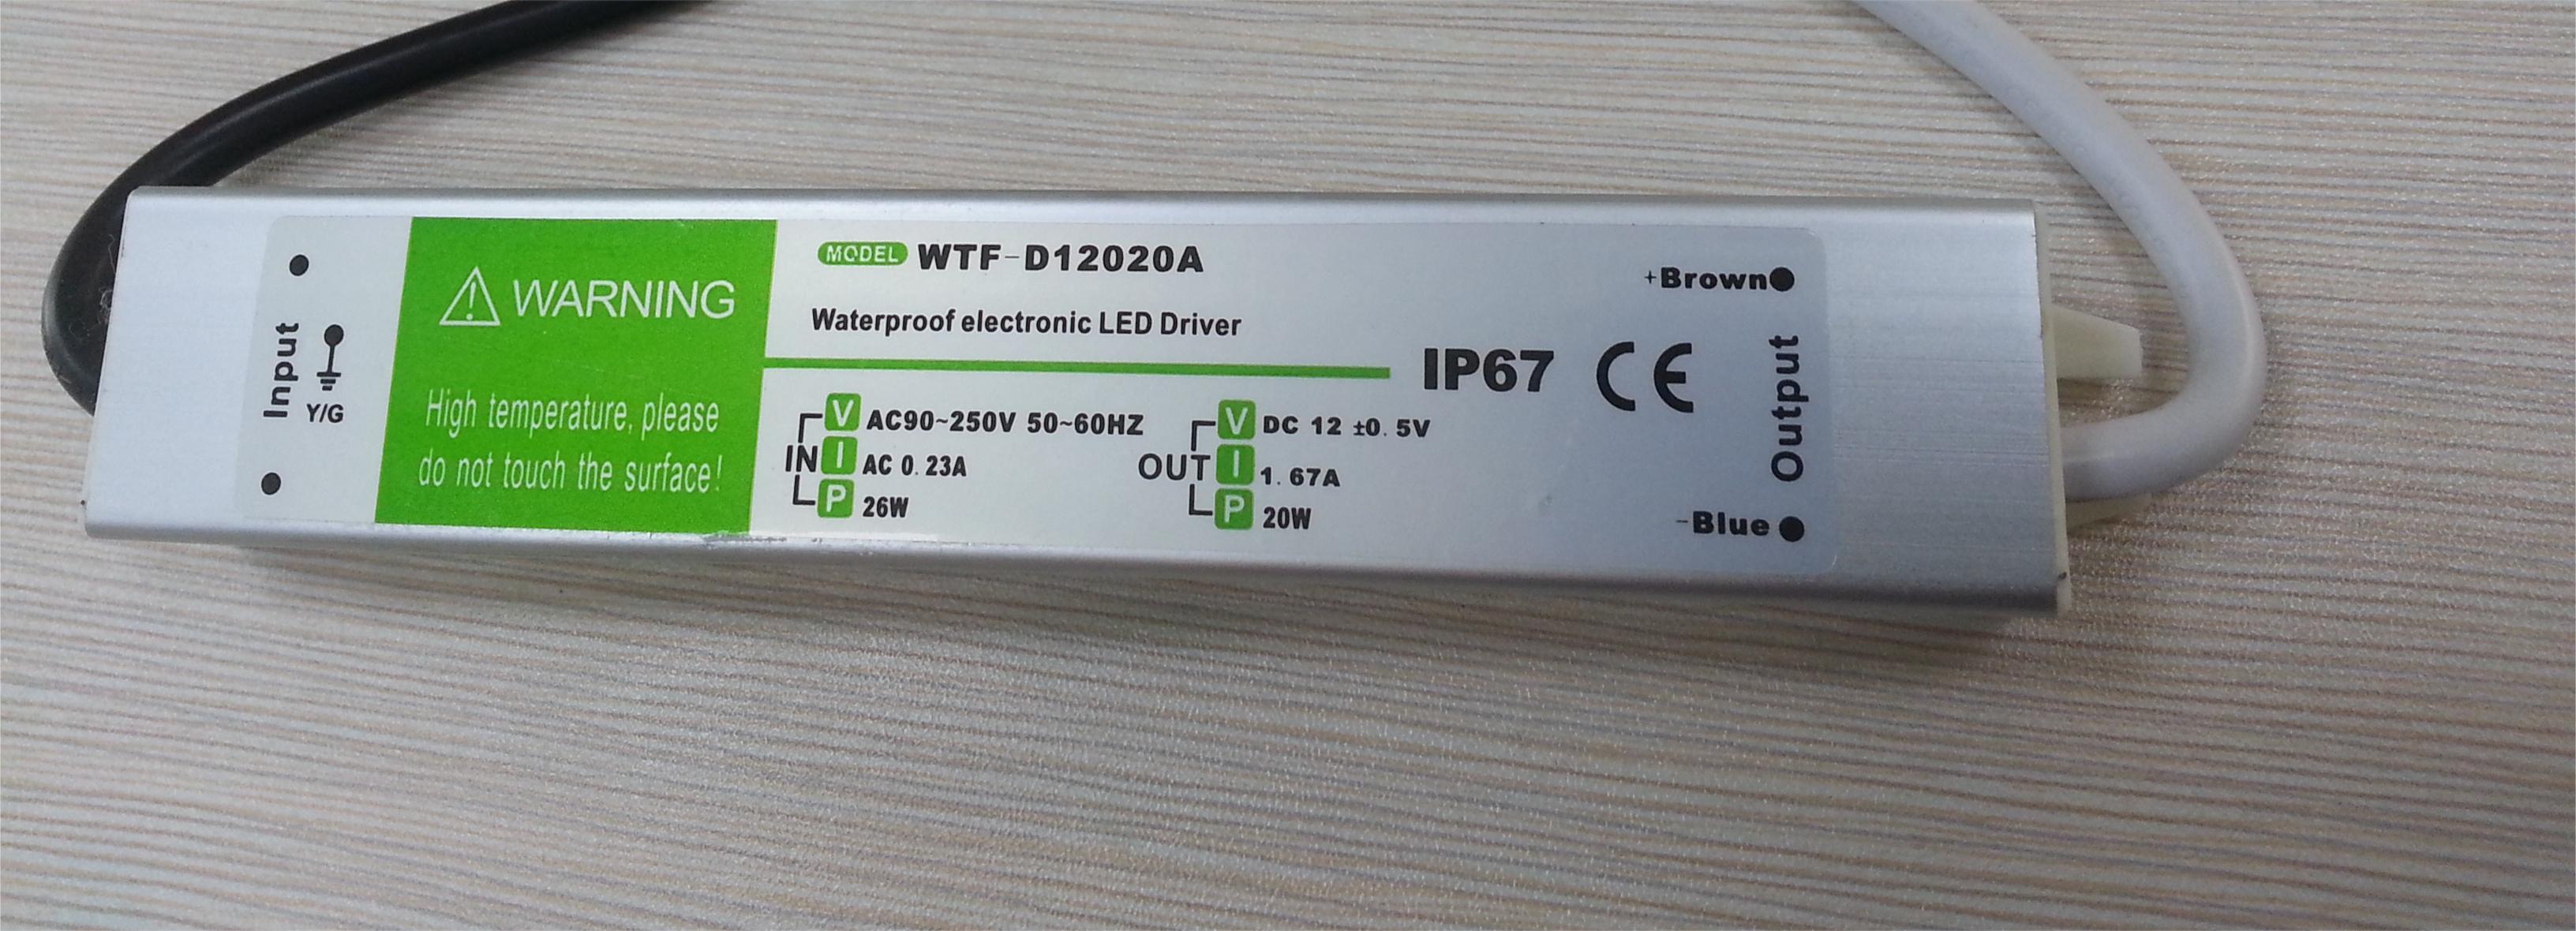 DC_12V_20W_Waterproof_Power_Supply_LED_Driver_AC_Transformer_factory_wholesale